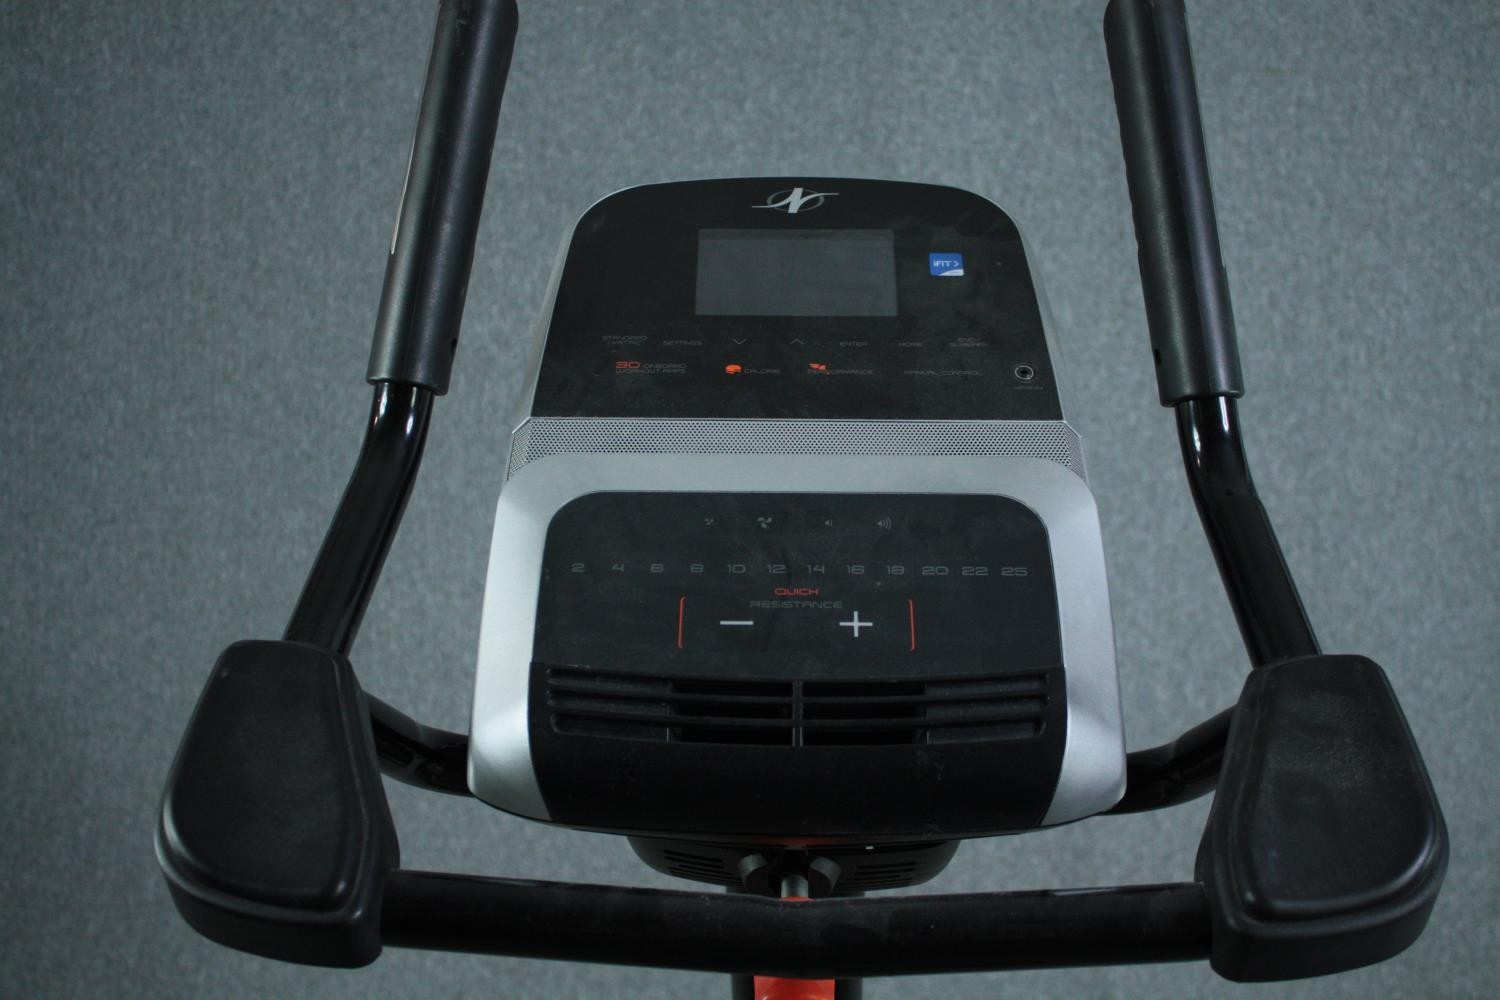 A contemporary NordicTrack exercise bike. H.160 W.110 D.31cm. - Image 5 of 7